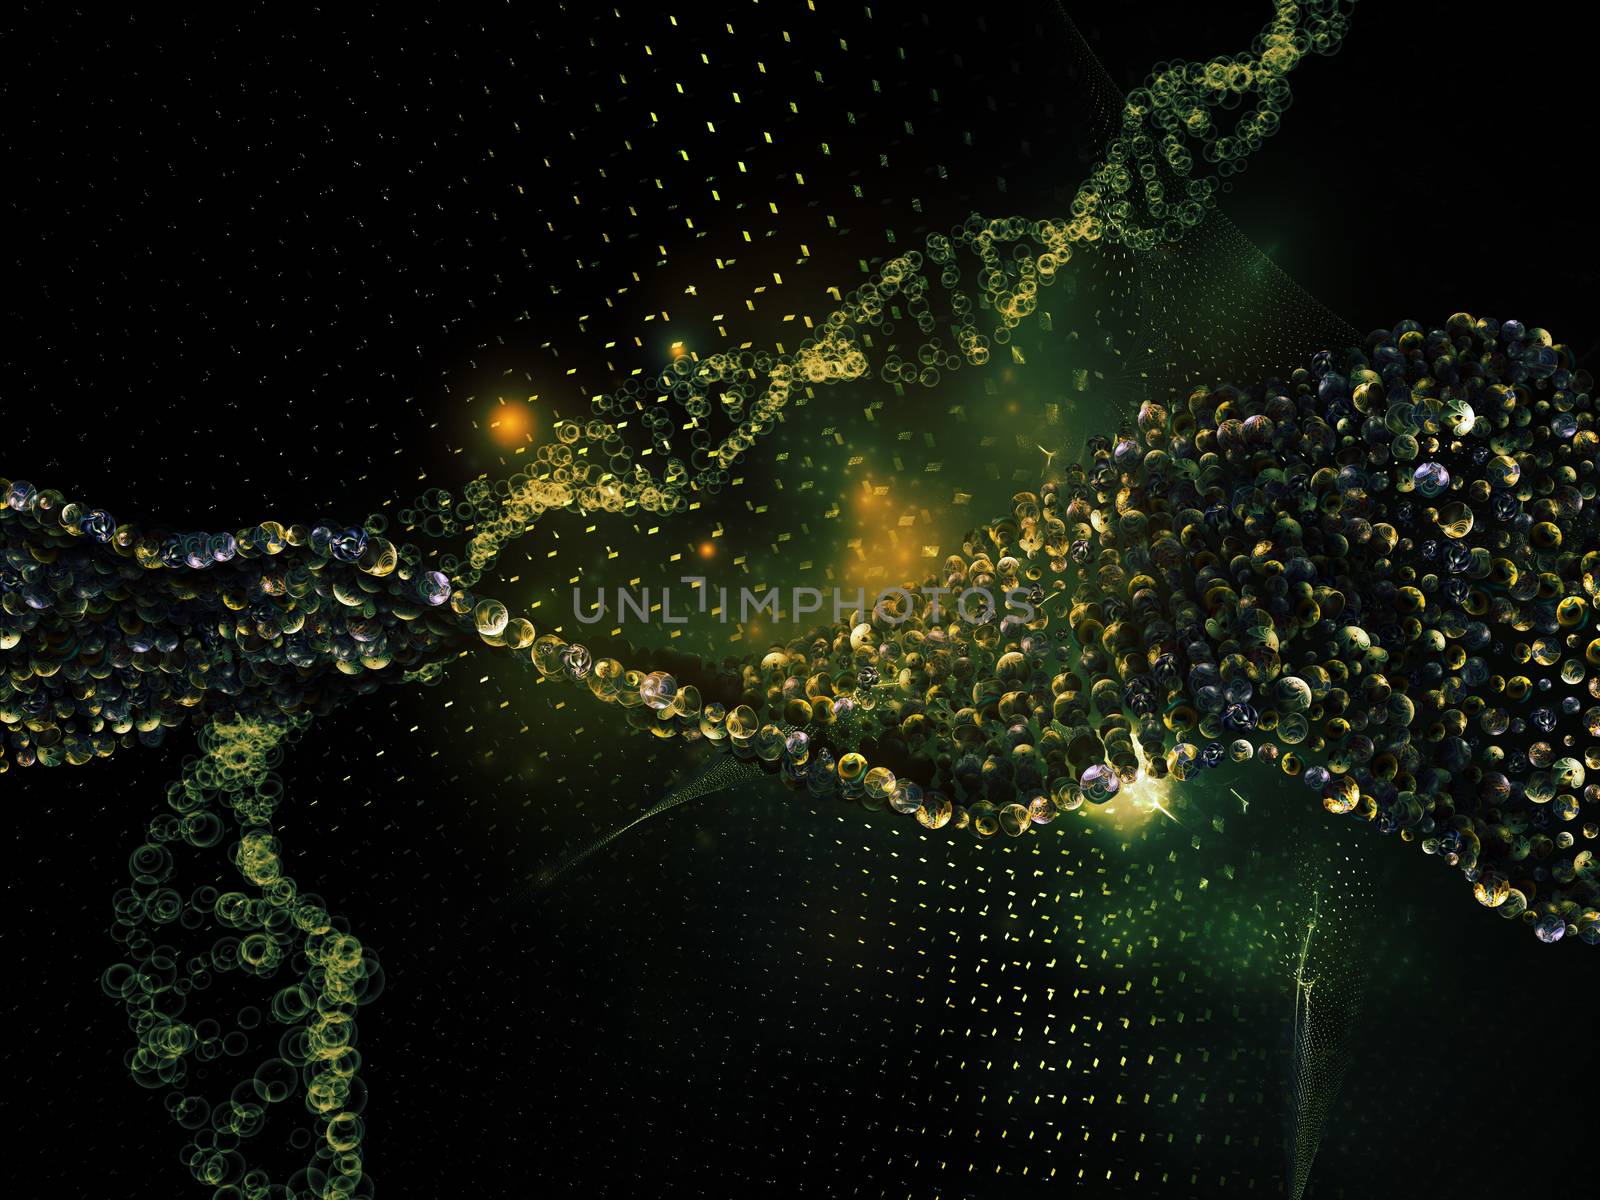 Visualization of DNA by agsandrew